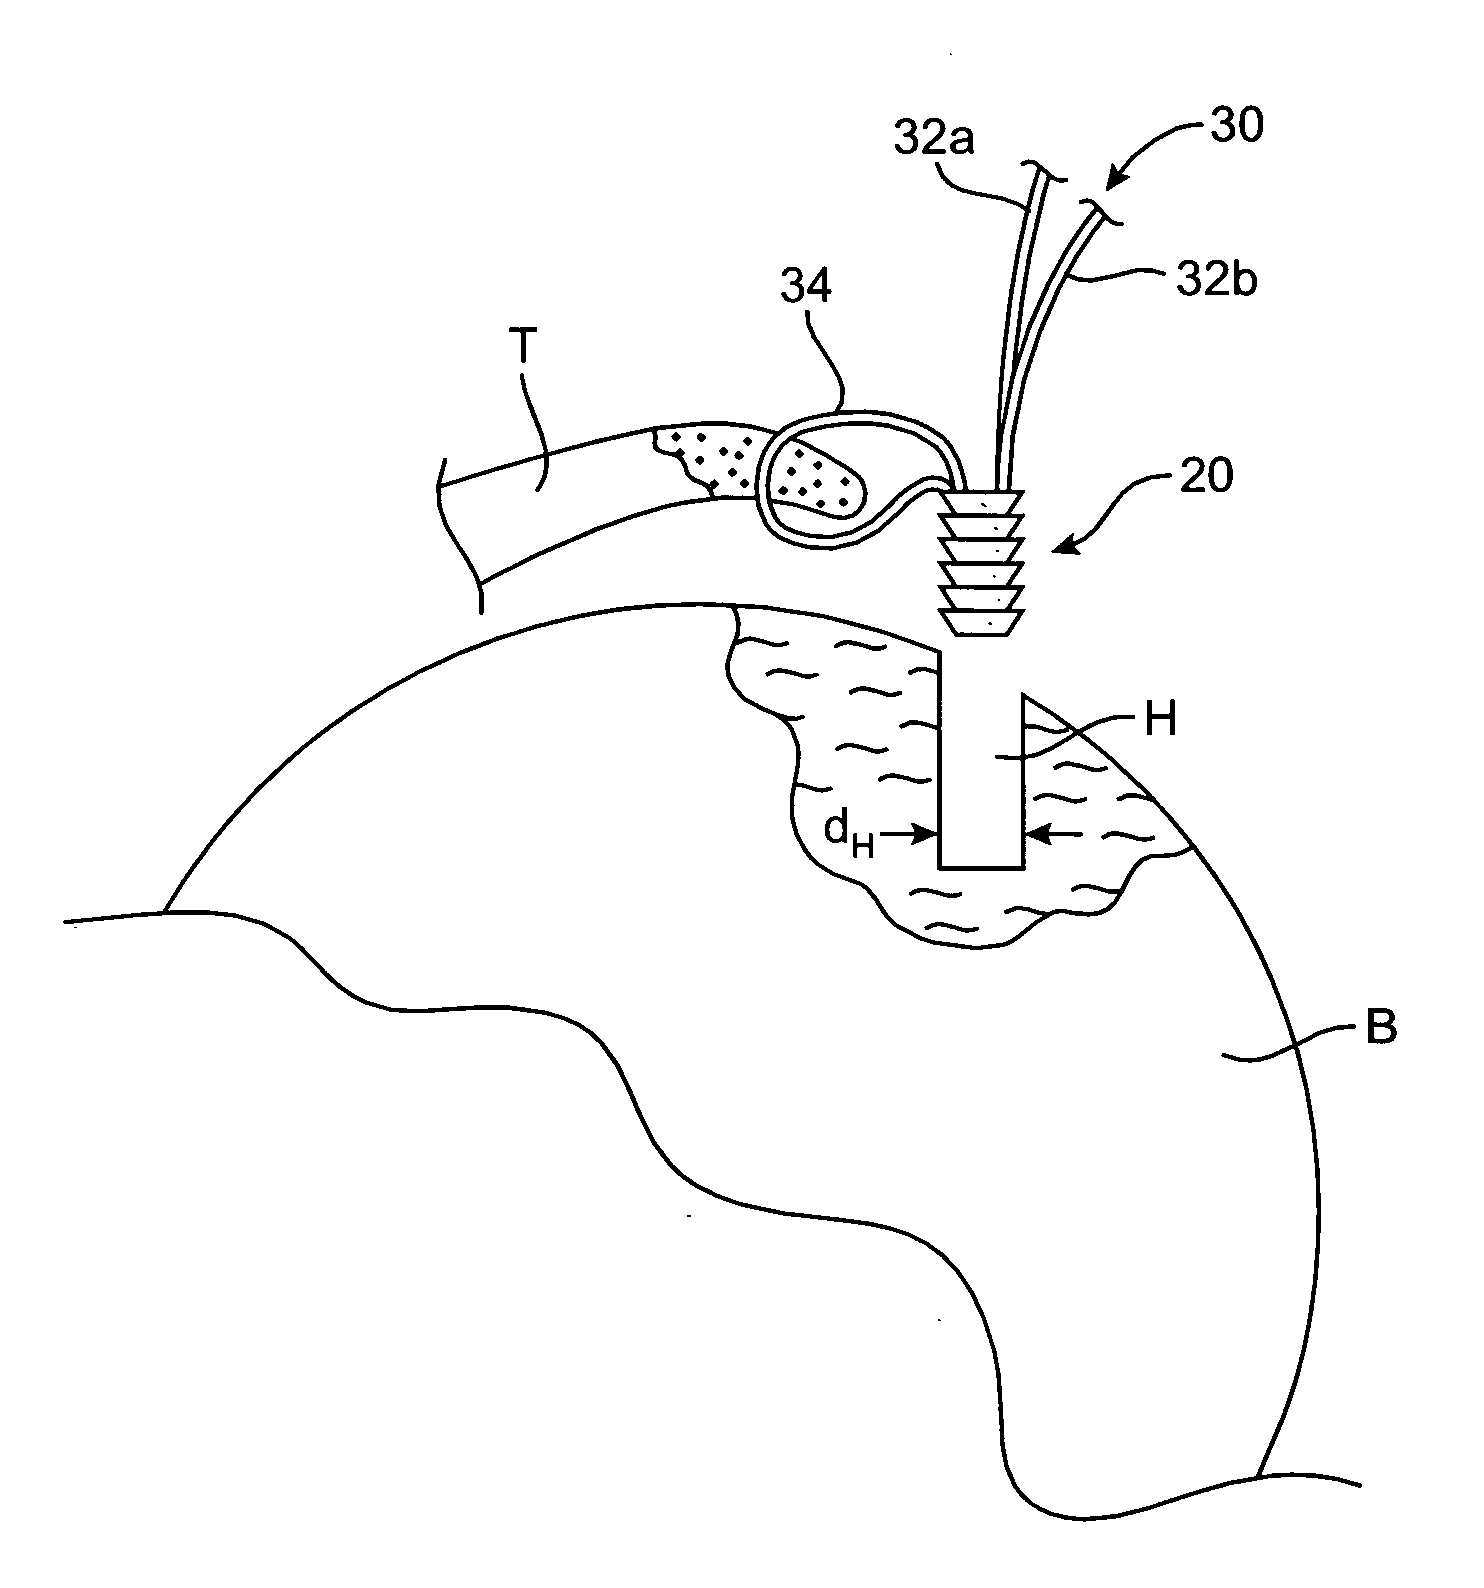 Apparatus and methods for securing tissue to bone